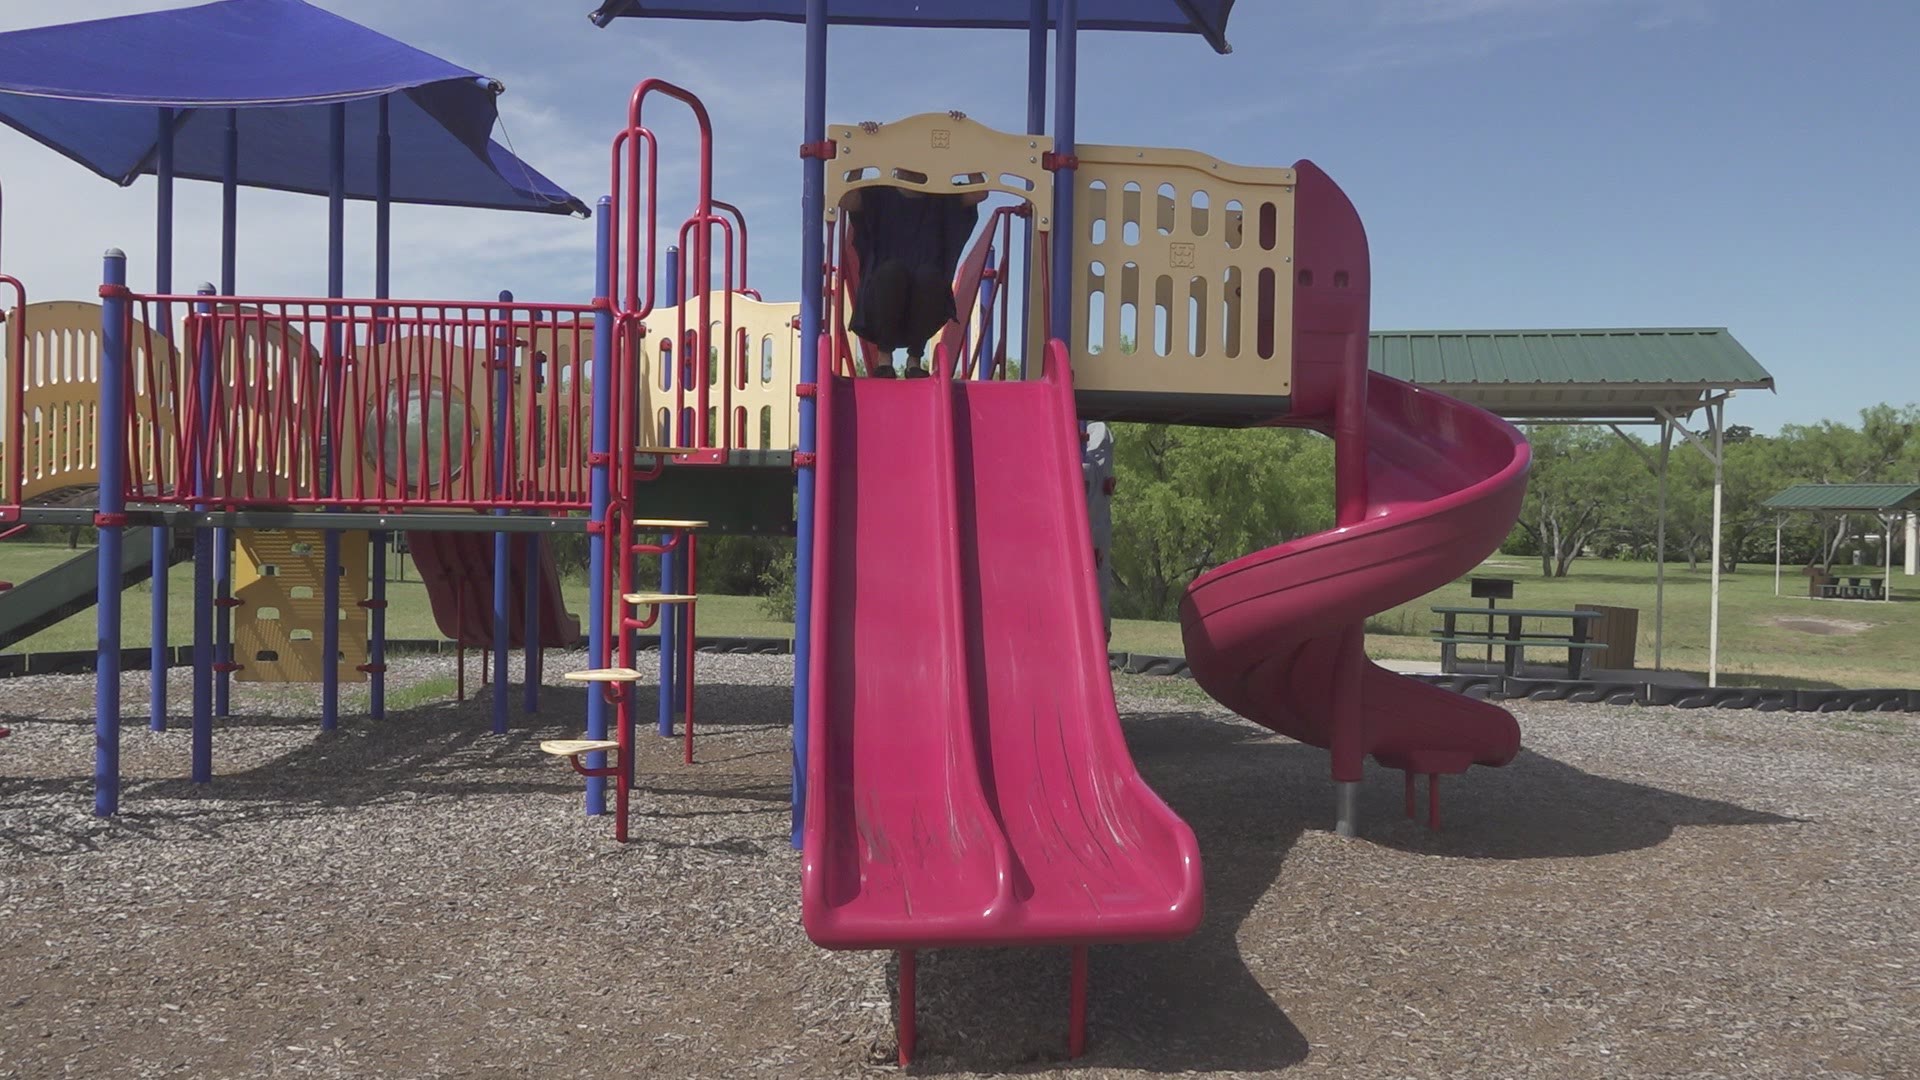 The city of Clyde adds an ADA swing to the public park.